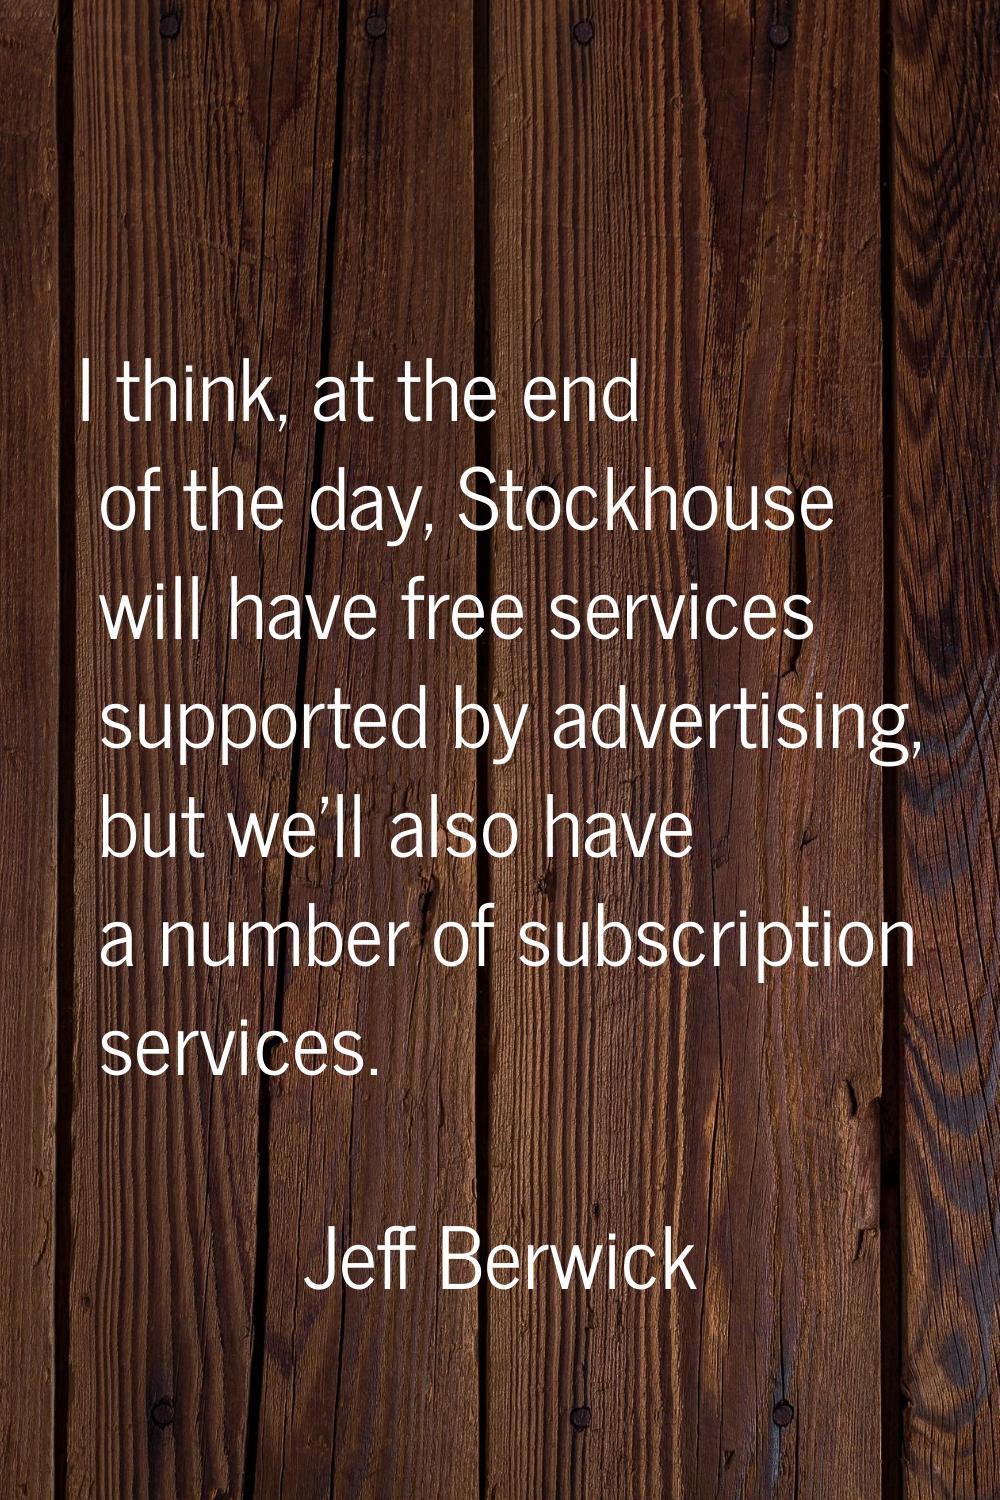 I think, at the end of the day, Stockhouse will have free services supported by advertising, but we